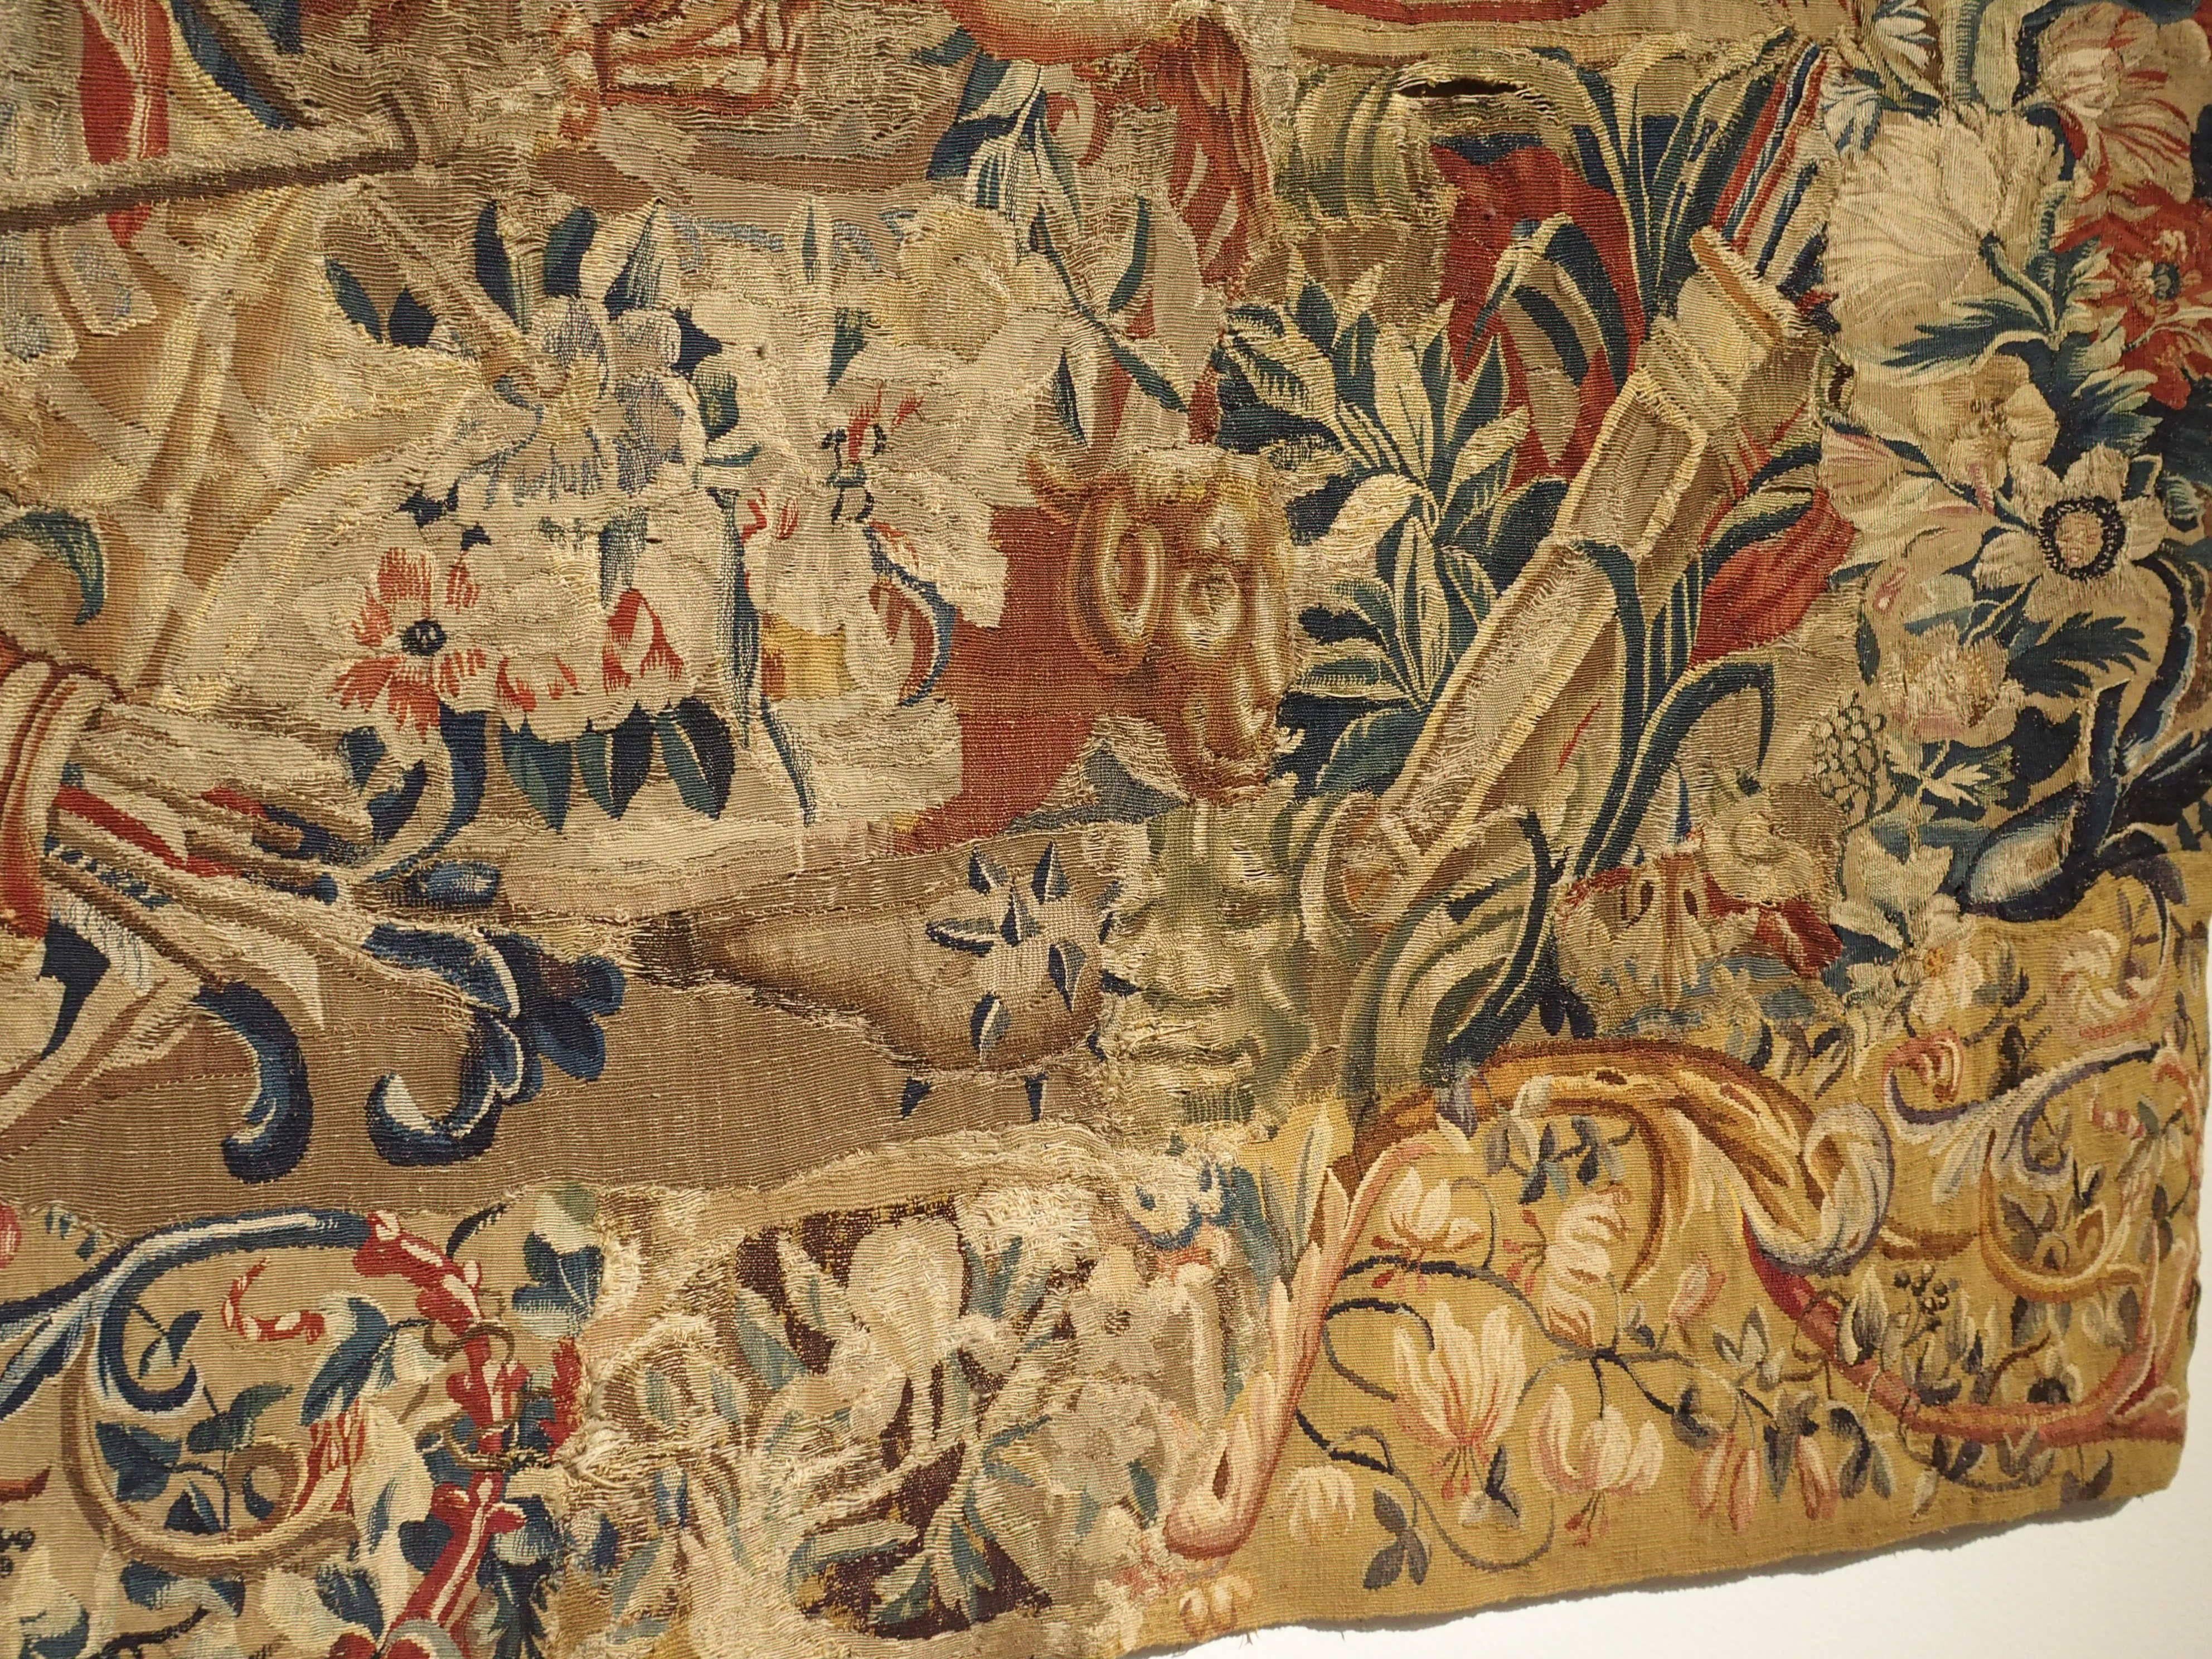 This is a large, horizontal fragment of a late 17th century Beauvais tapestry. Beauvais tapestry manufacture was one of the most well-known tapestry workshops in France. Beauvais was a private enterprise which made glorious tapestries at the special